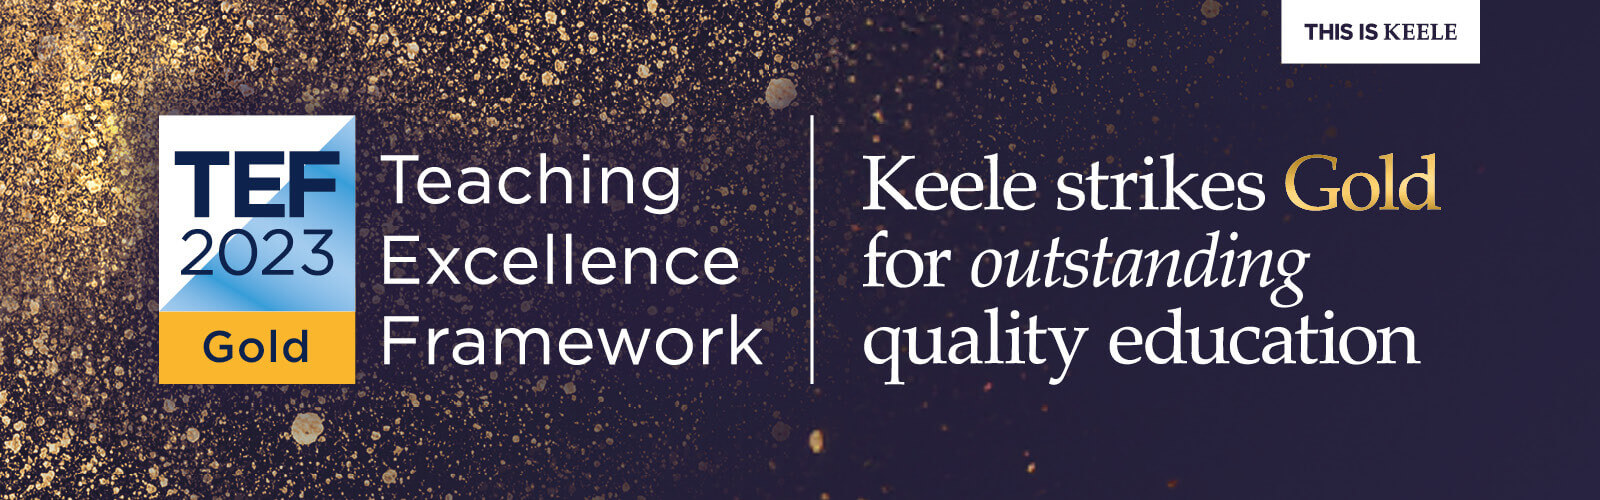 Keele strikes Gold for outstanding quality education